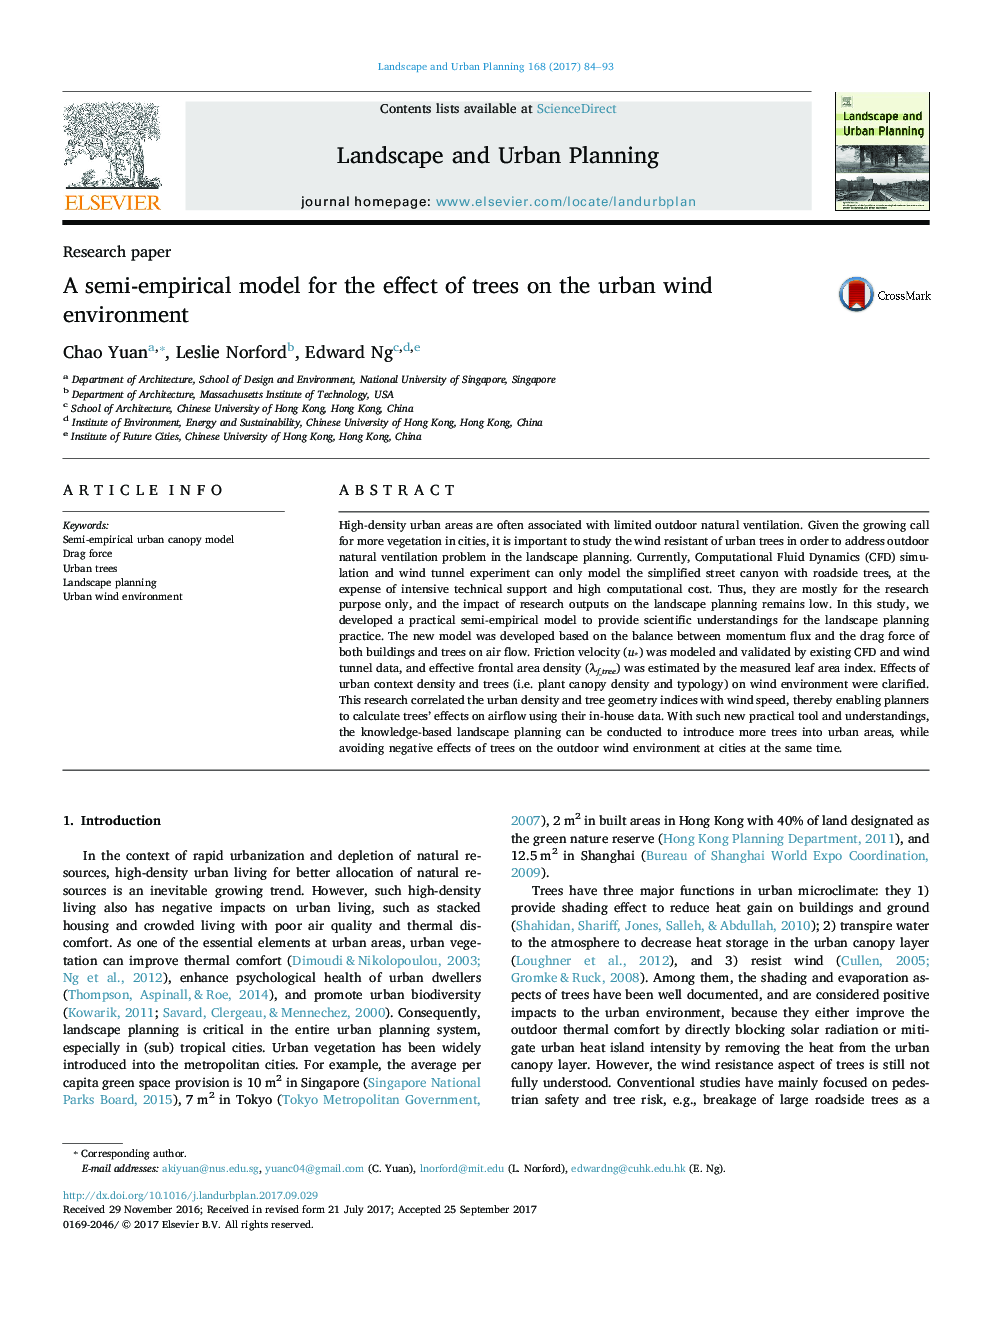 A semi-empirical model for the effect of trees on the urban wind environment